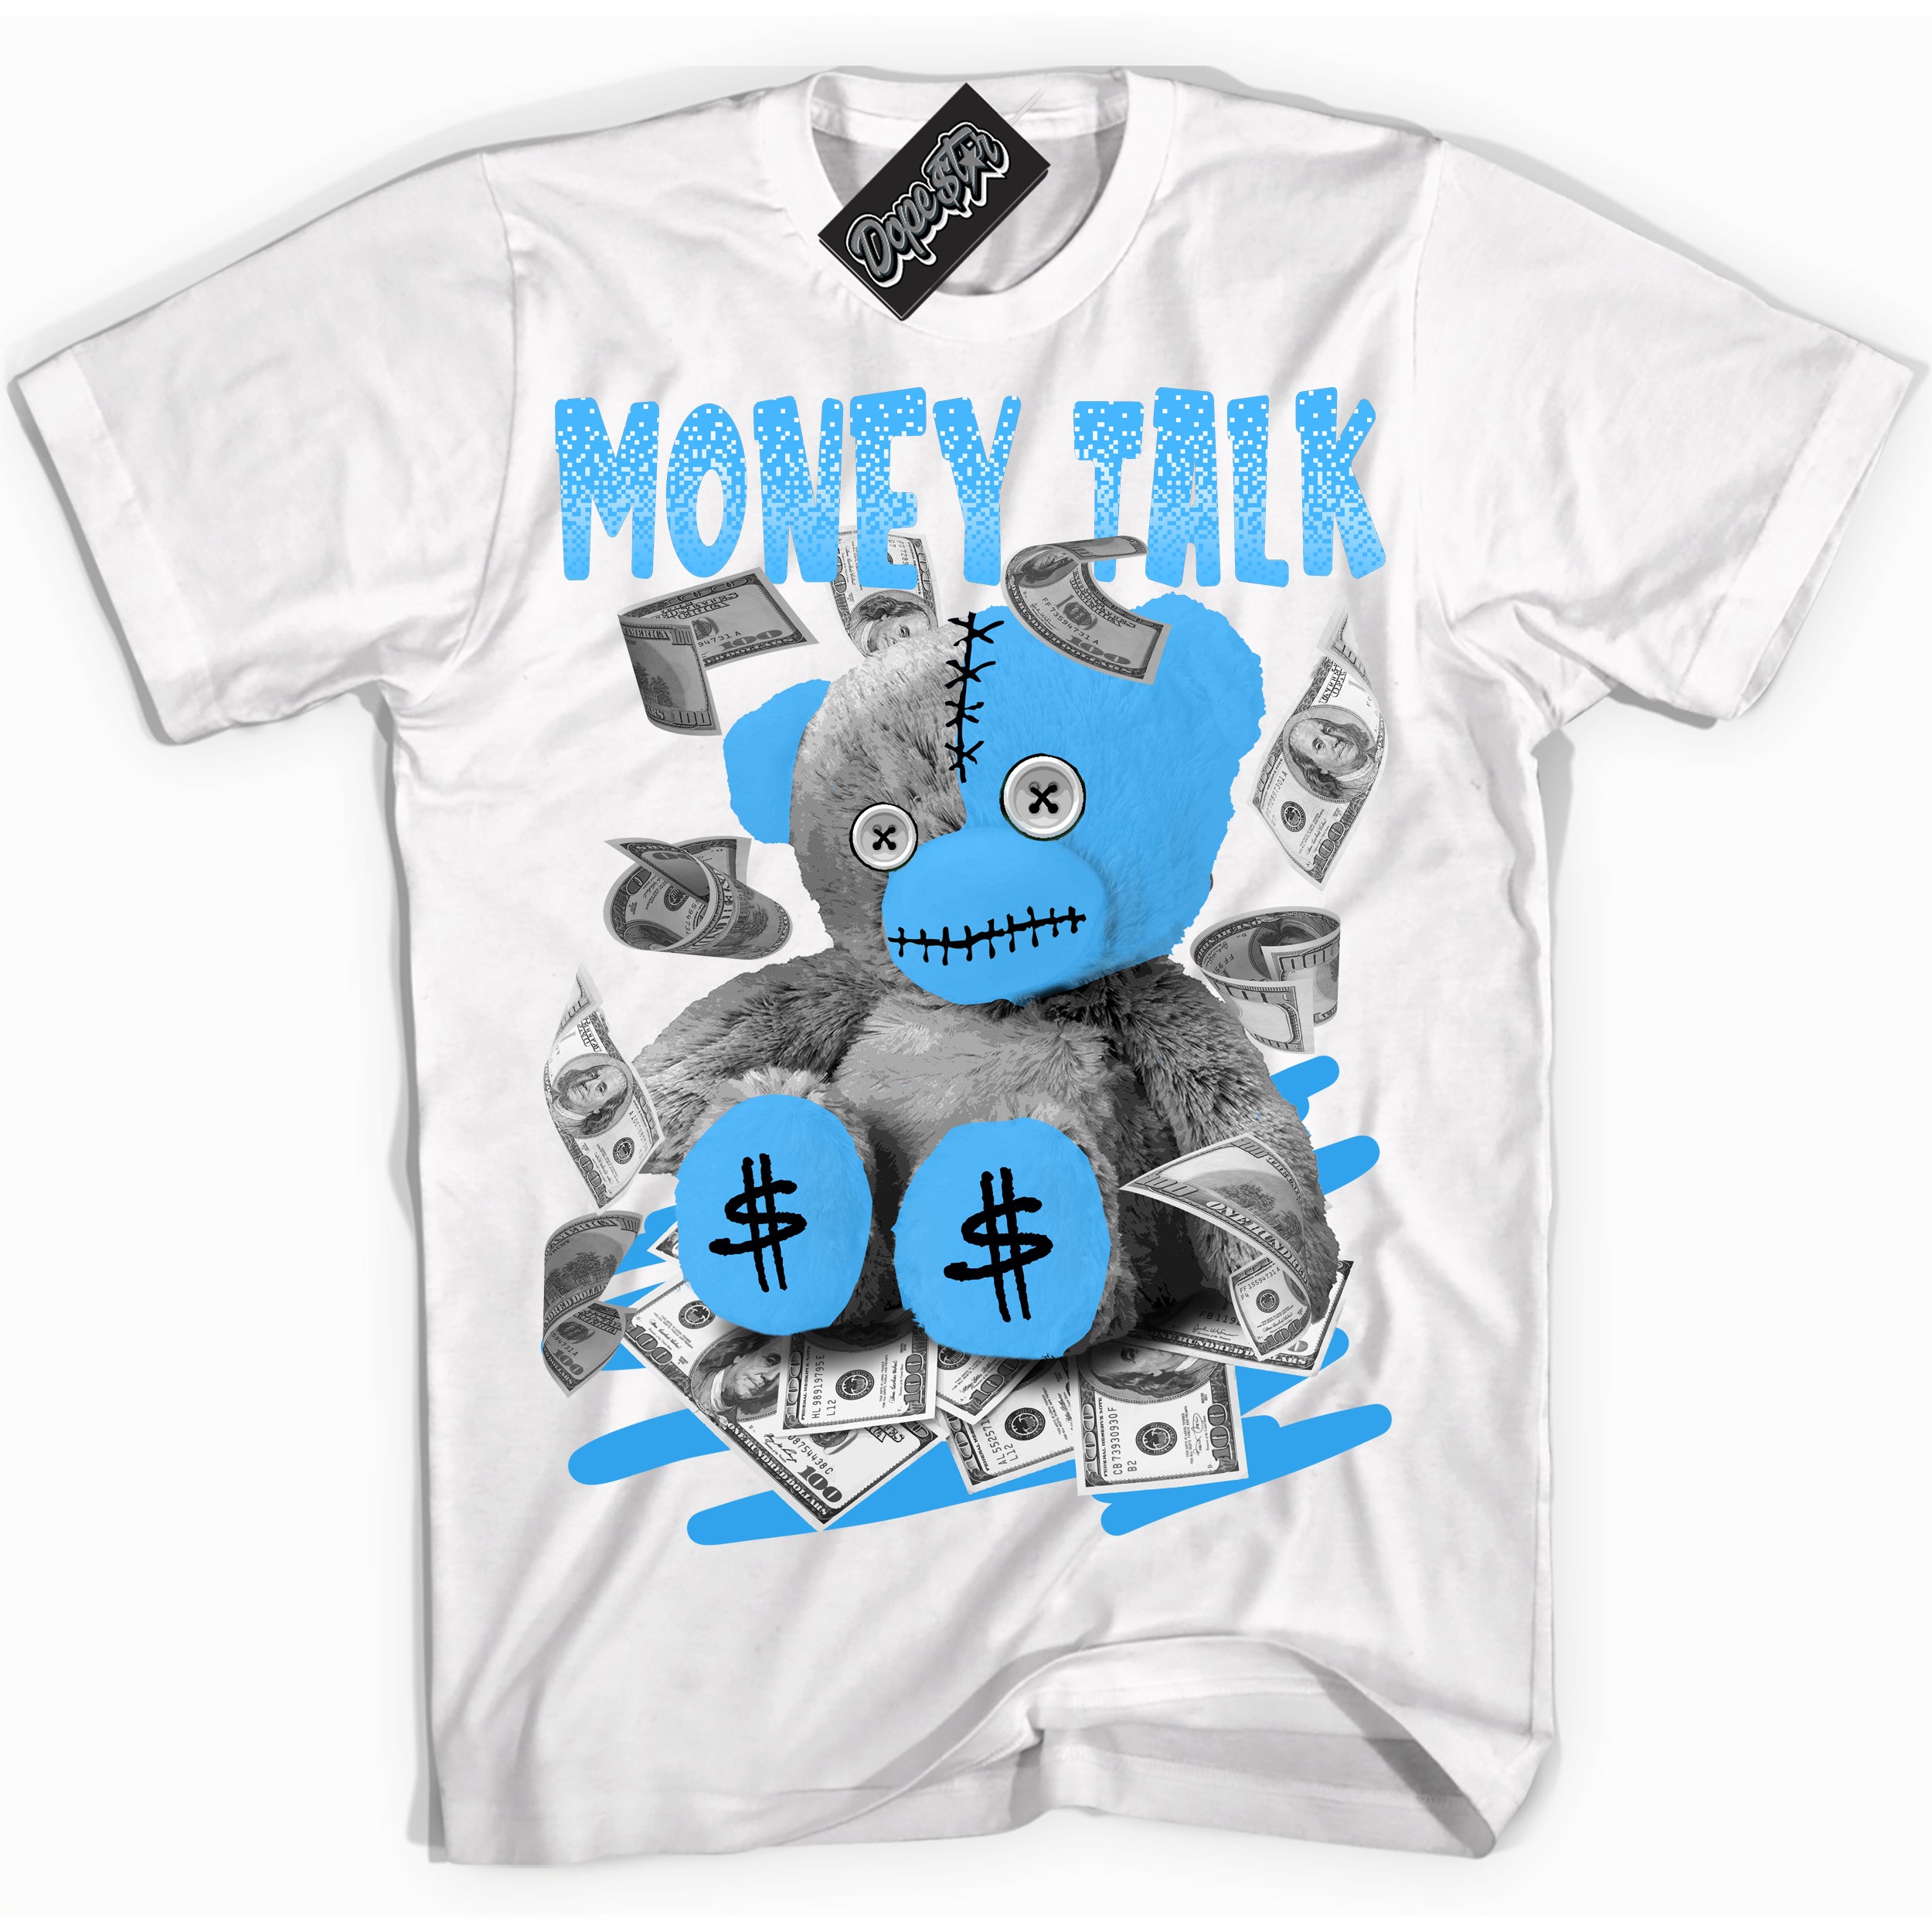 Cool White graphic tee with “ Money Talk Bear ” design, that perfectly matches Powder Blue 9s sneakers 